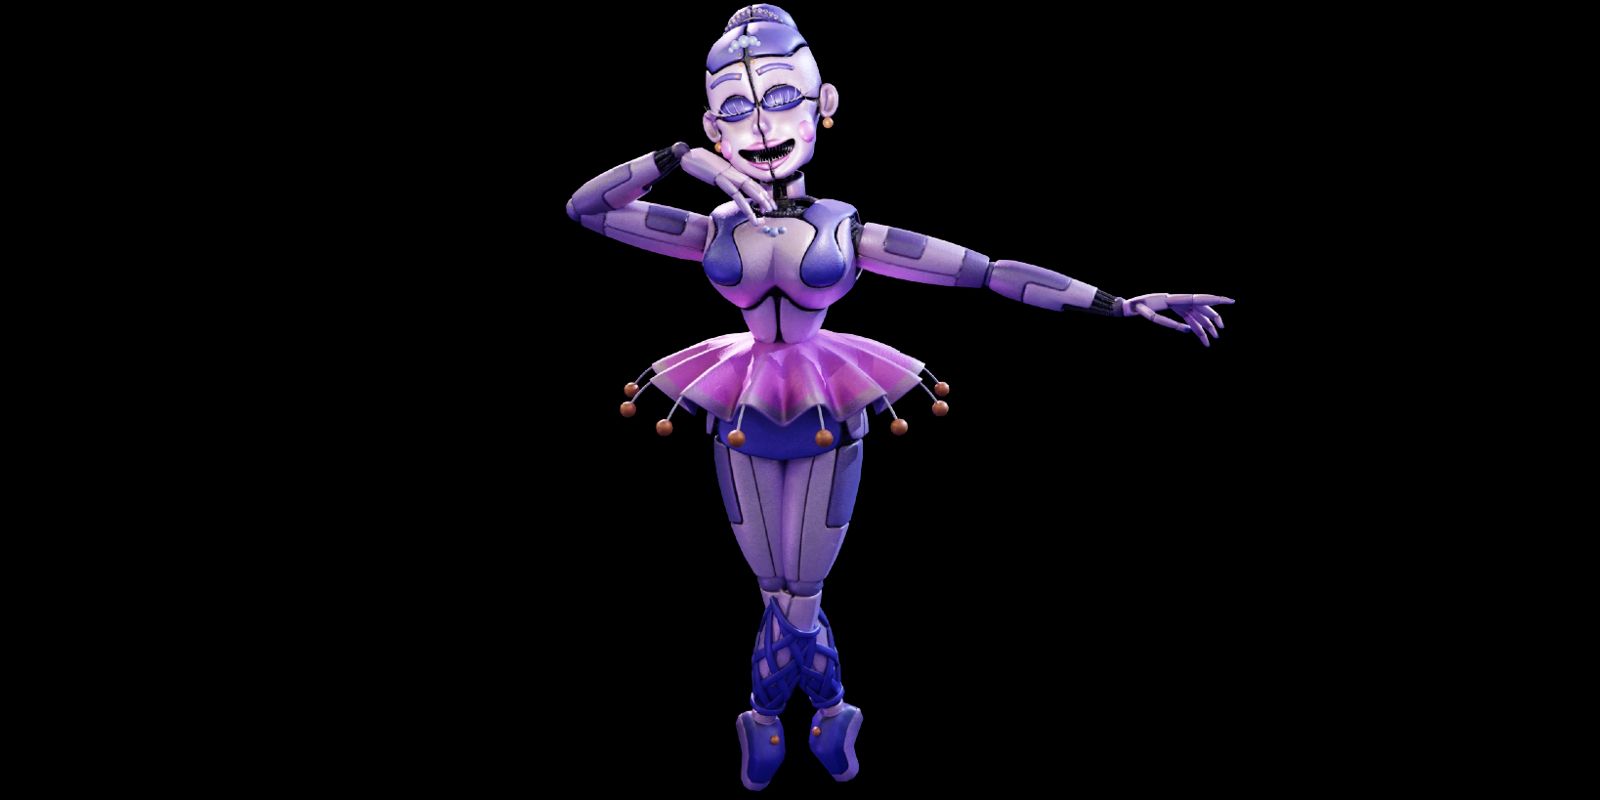 Ballora stands on pointe with one hand at her face and the other outstretched.